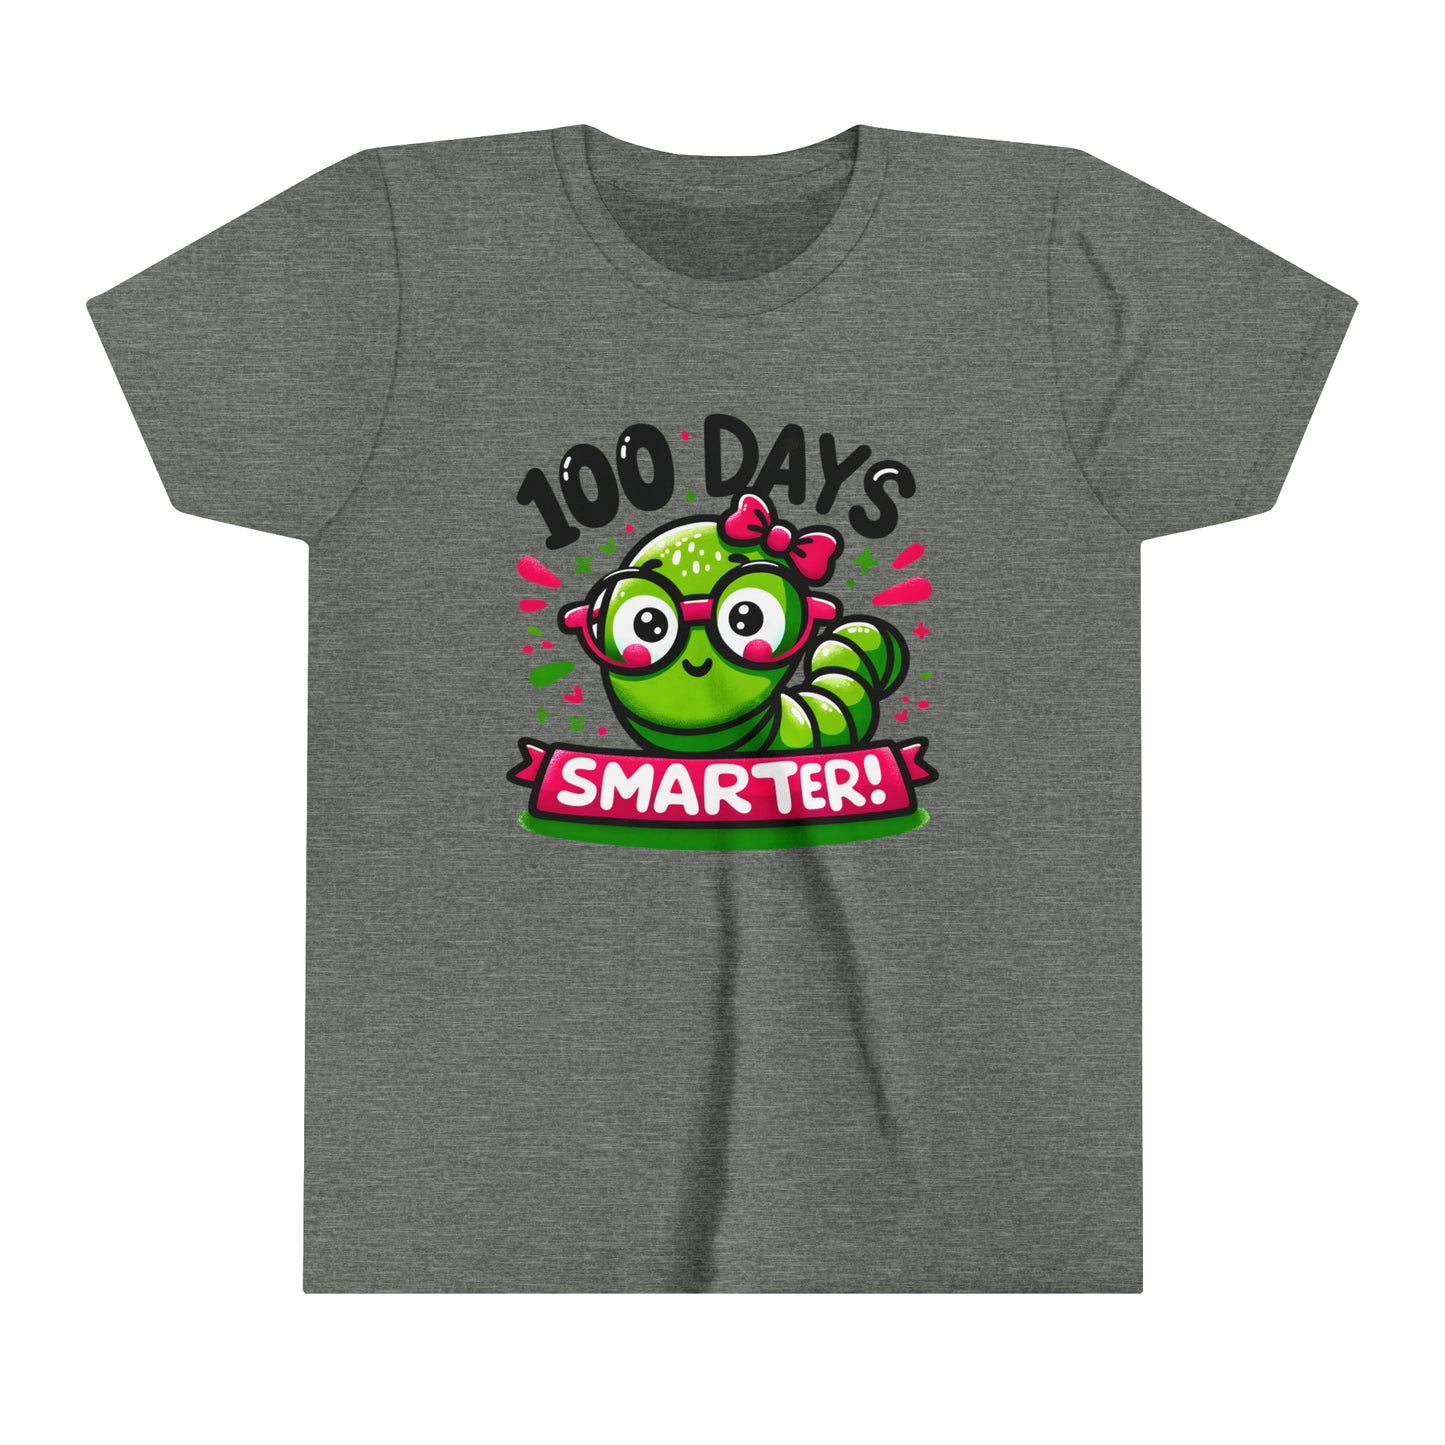 100 Days Smarter 100 Days of School Girl's Youth Short Sleeve Tee